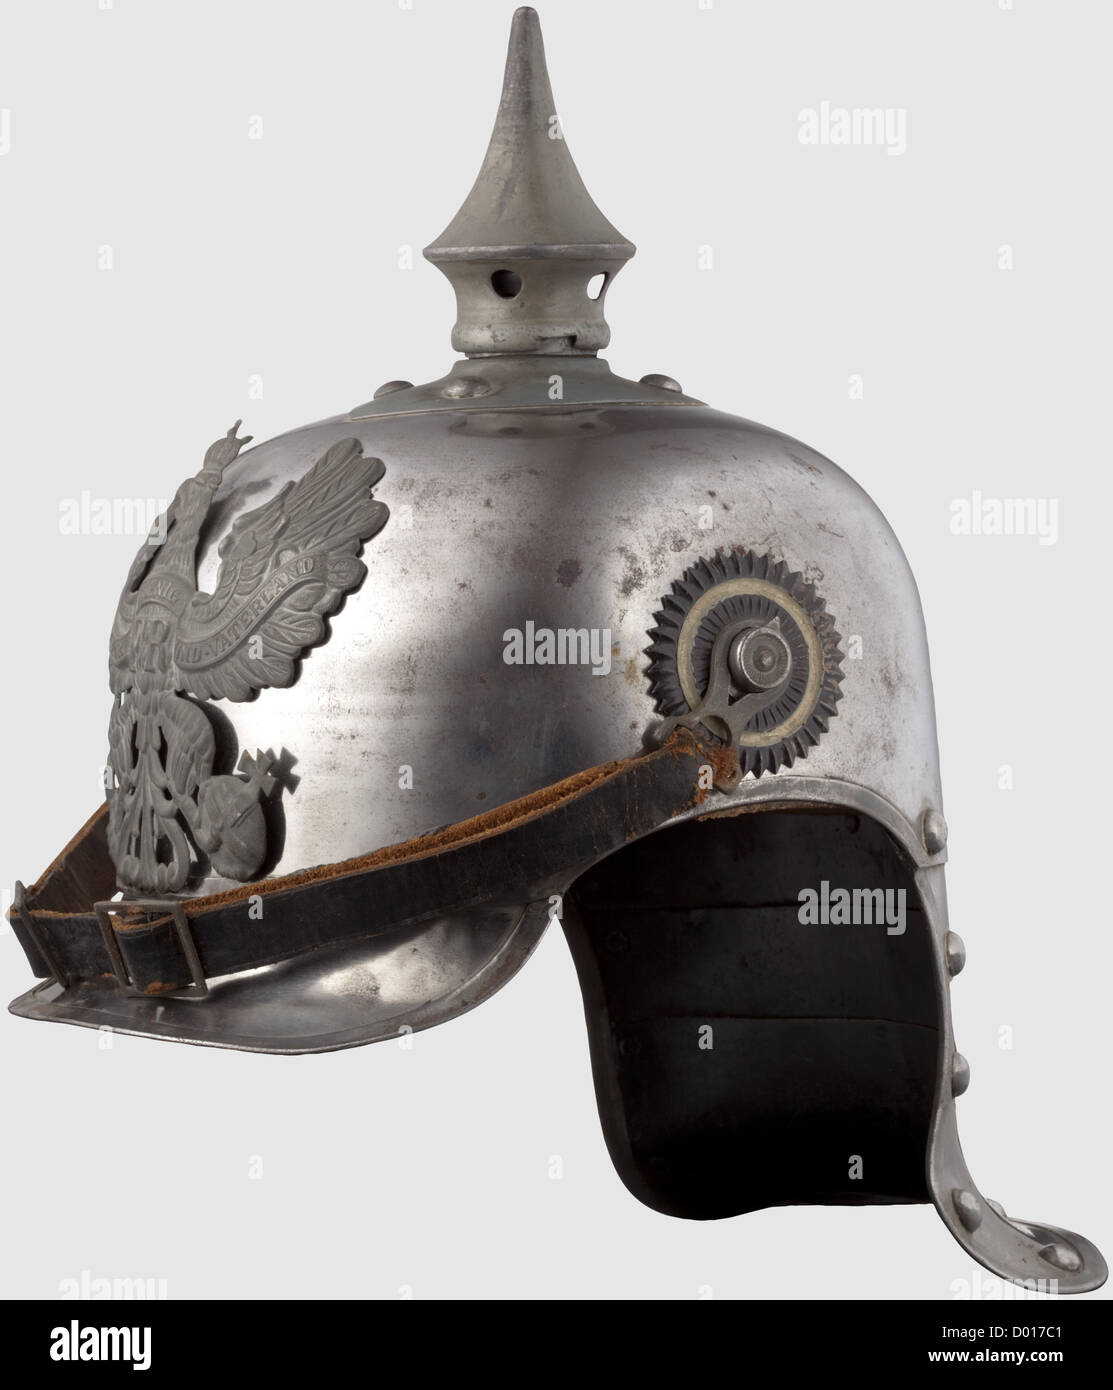 A model 1915 helmet for enlisted personnel,of the Cuirassiers of the Line. Steel skull with steel trim and rivets. Field grey lacquered spike on a bayonet mount. Field grey line eagle plate. Leather chinstraps on '91' buttons. Enlisted men's cockades. Leather lining. The maker's inscription 'Lachmann Berlin 1916' inside at the top,historic,historical,1910s,20th century,Prussian,Prussia,German,Germany,militaria,military,object,objects,stills,clipping,clippings,cut out,cut-out,cut-outs,helmet,helmets,headpiece,headpieces,utensil,piece of ,Additional-Rights-Clearences-Not Available Stock Photo